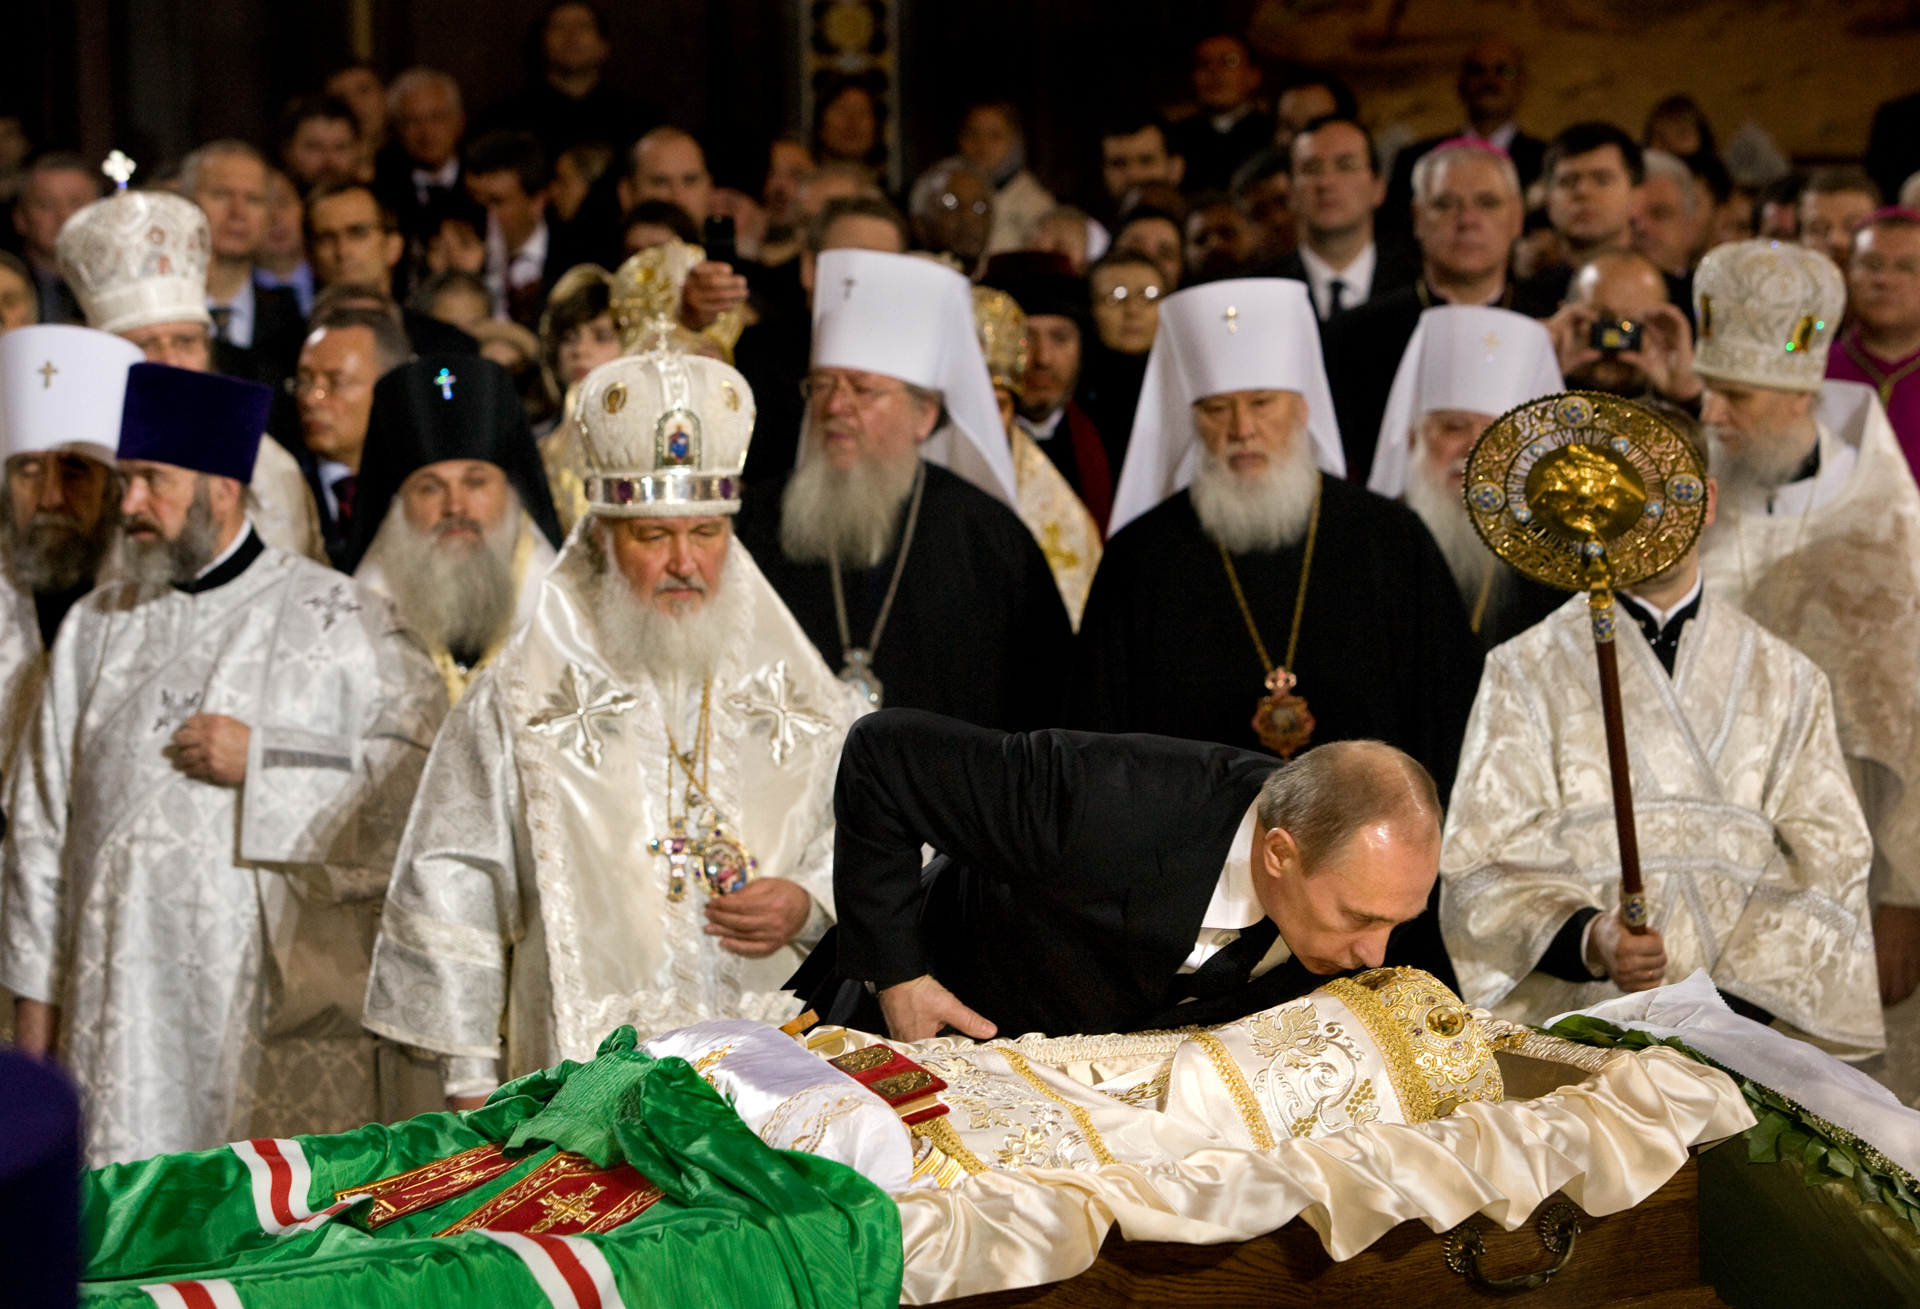  At the funeral of Alexy II, Prime Minister Putin kisses the body of the late patriarch while the successor, Metropolitan Kirill stands close.  Moscow, Russia  